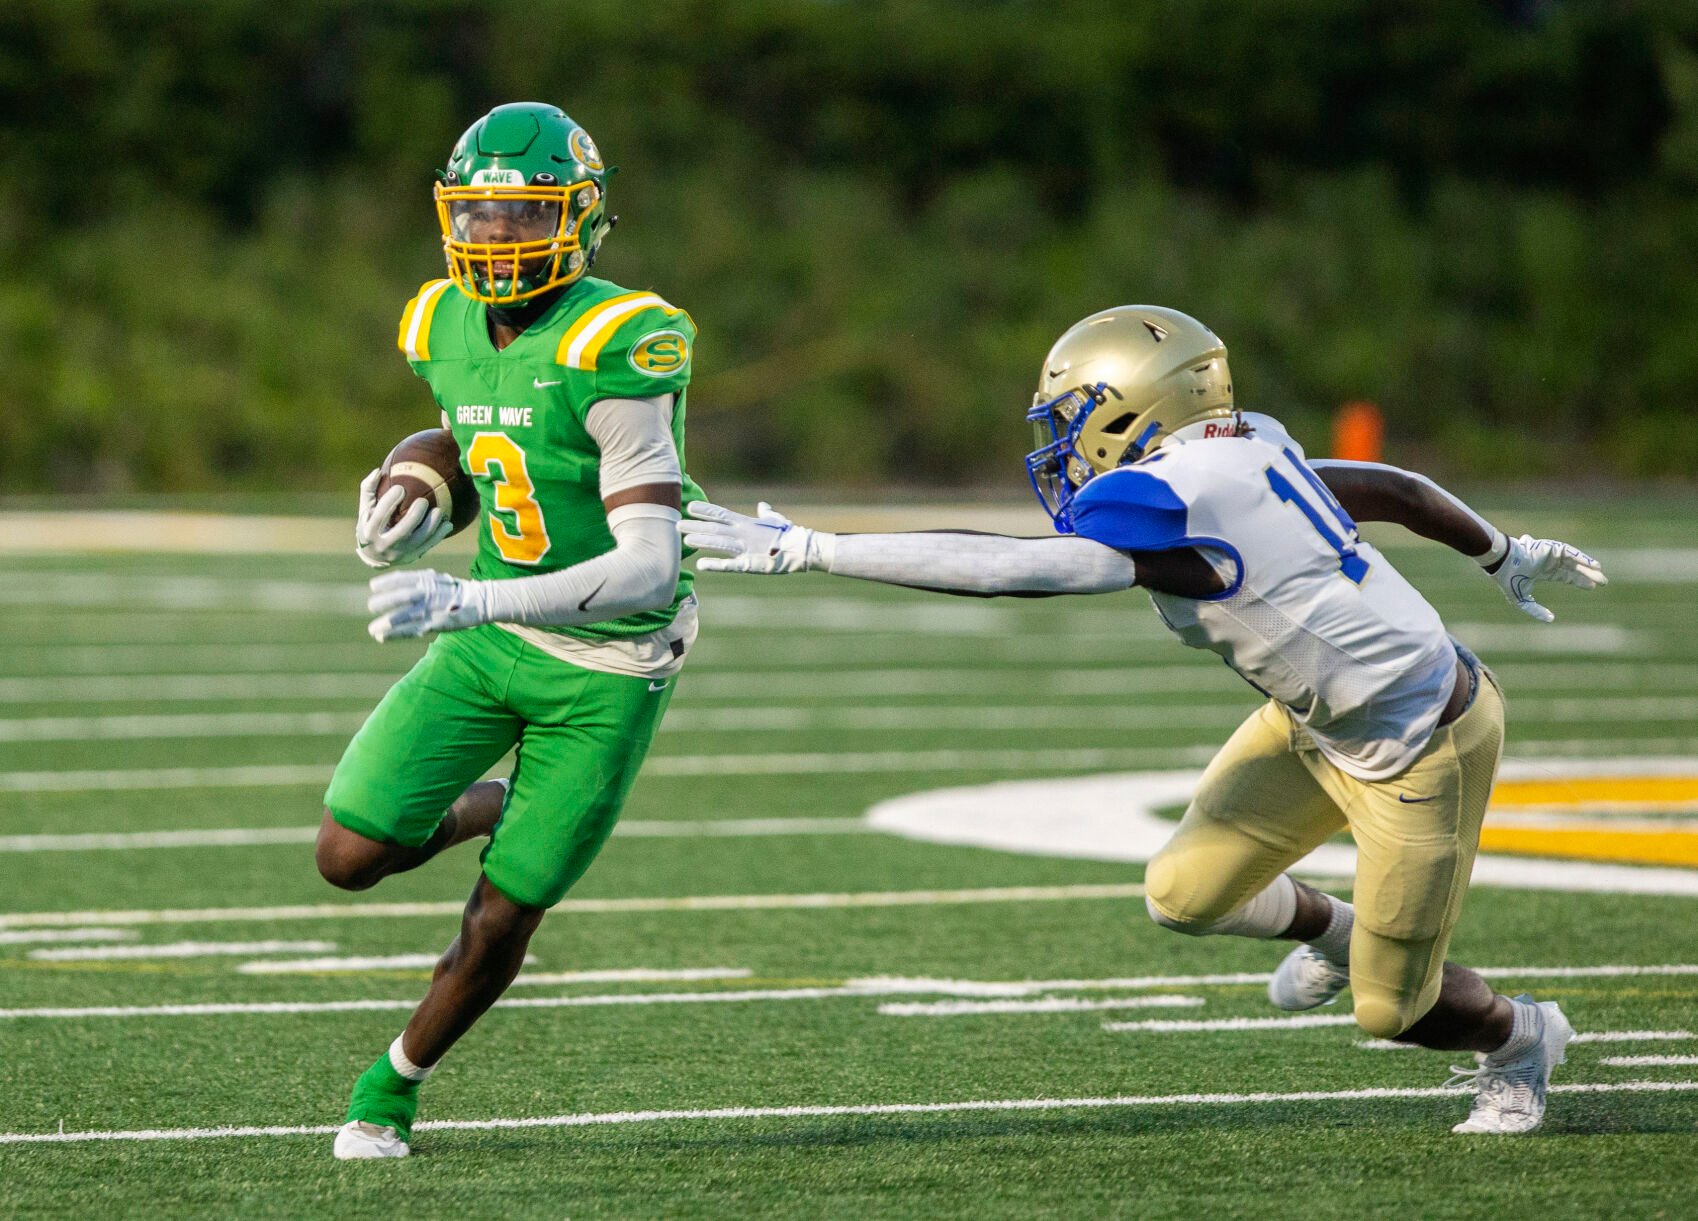 Yannick Smith Dominates with 241 Yards and Four Touchdowns as Summerville Stays Undefeated